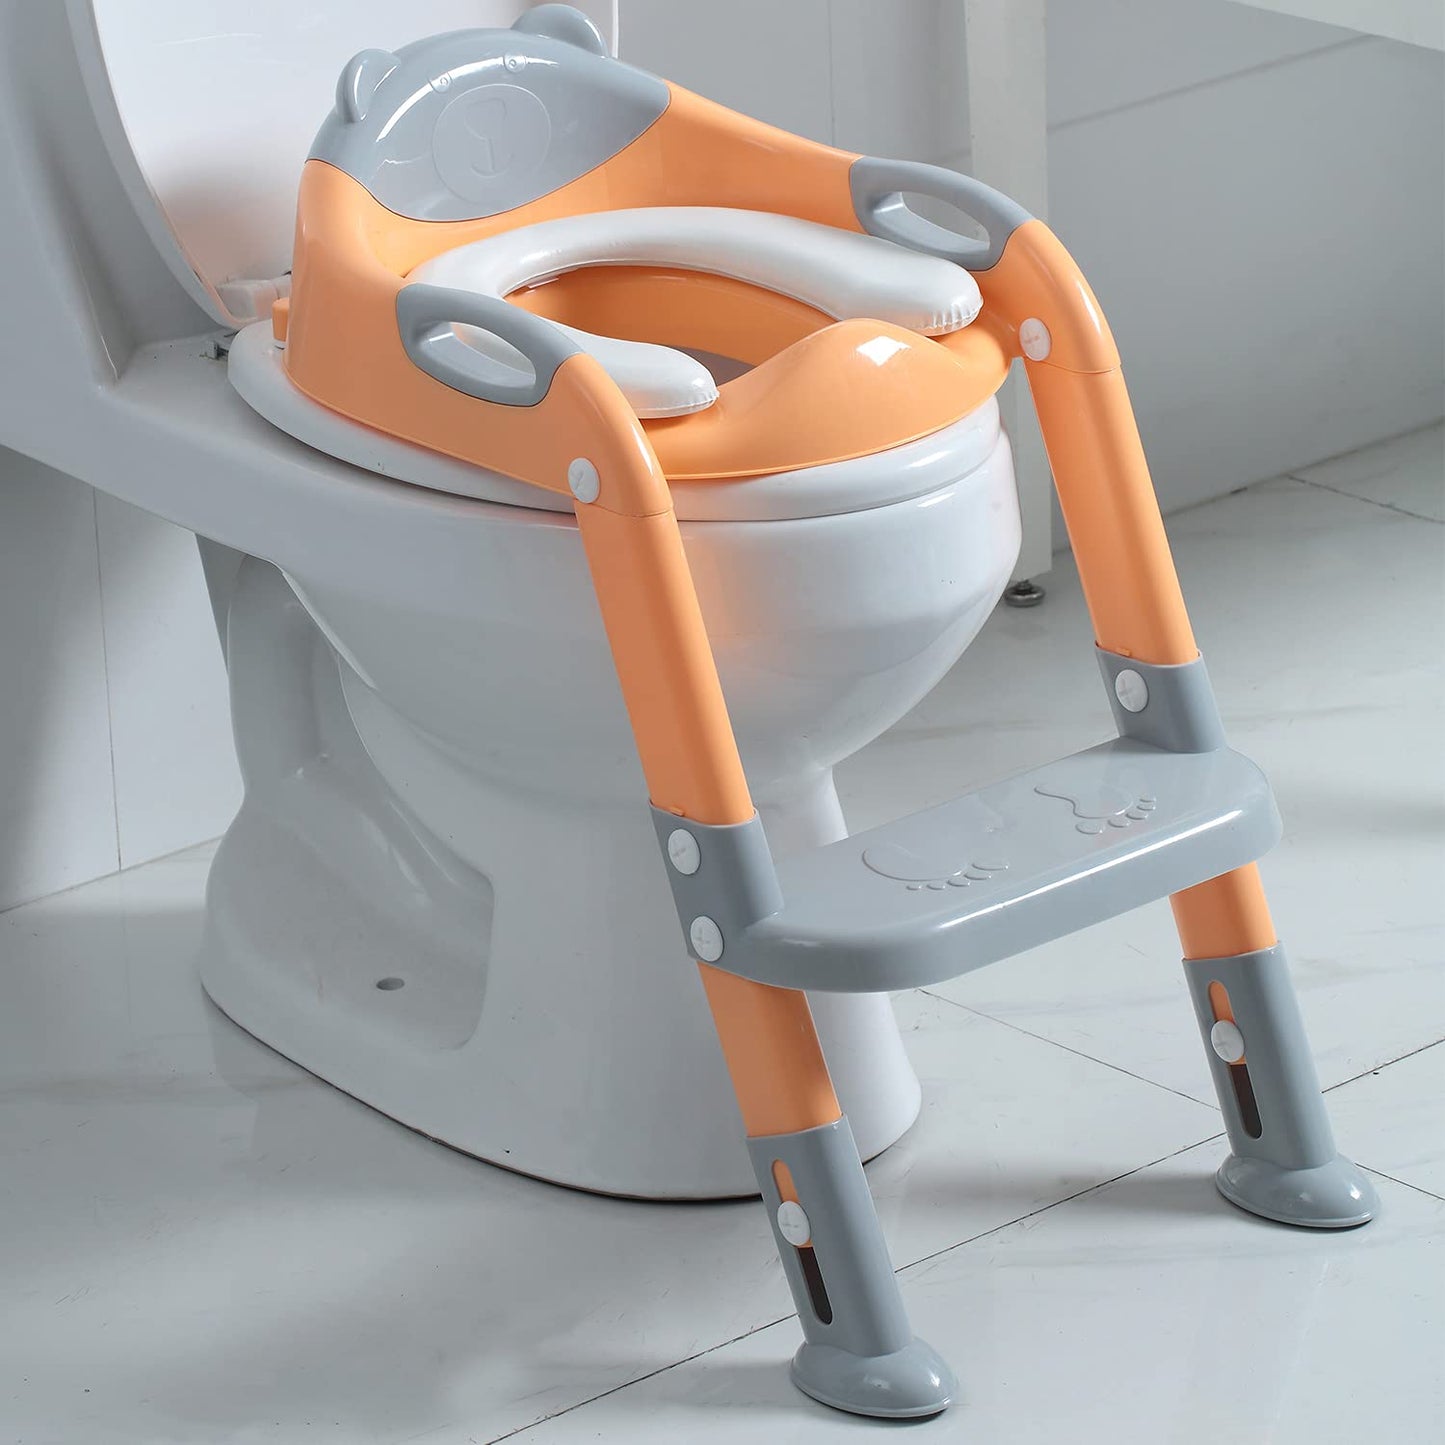 2-in-1 Potty Training Toilet Seat for kids - Toddler Potty Chair with Step Stool Ladder